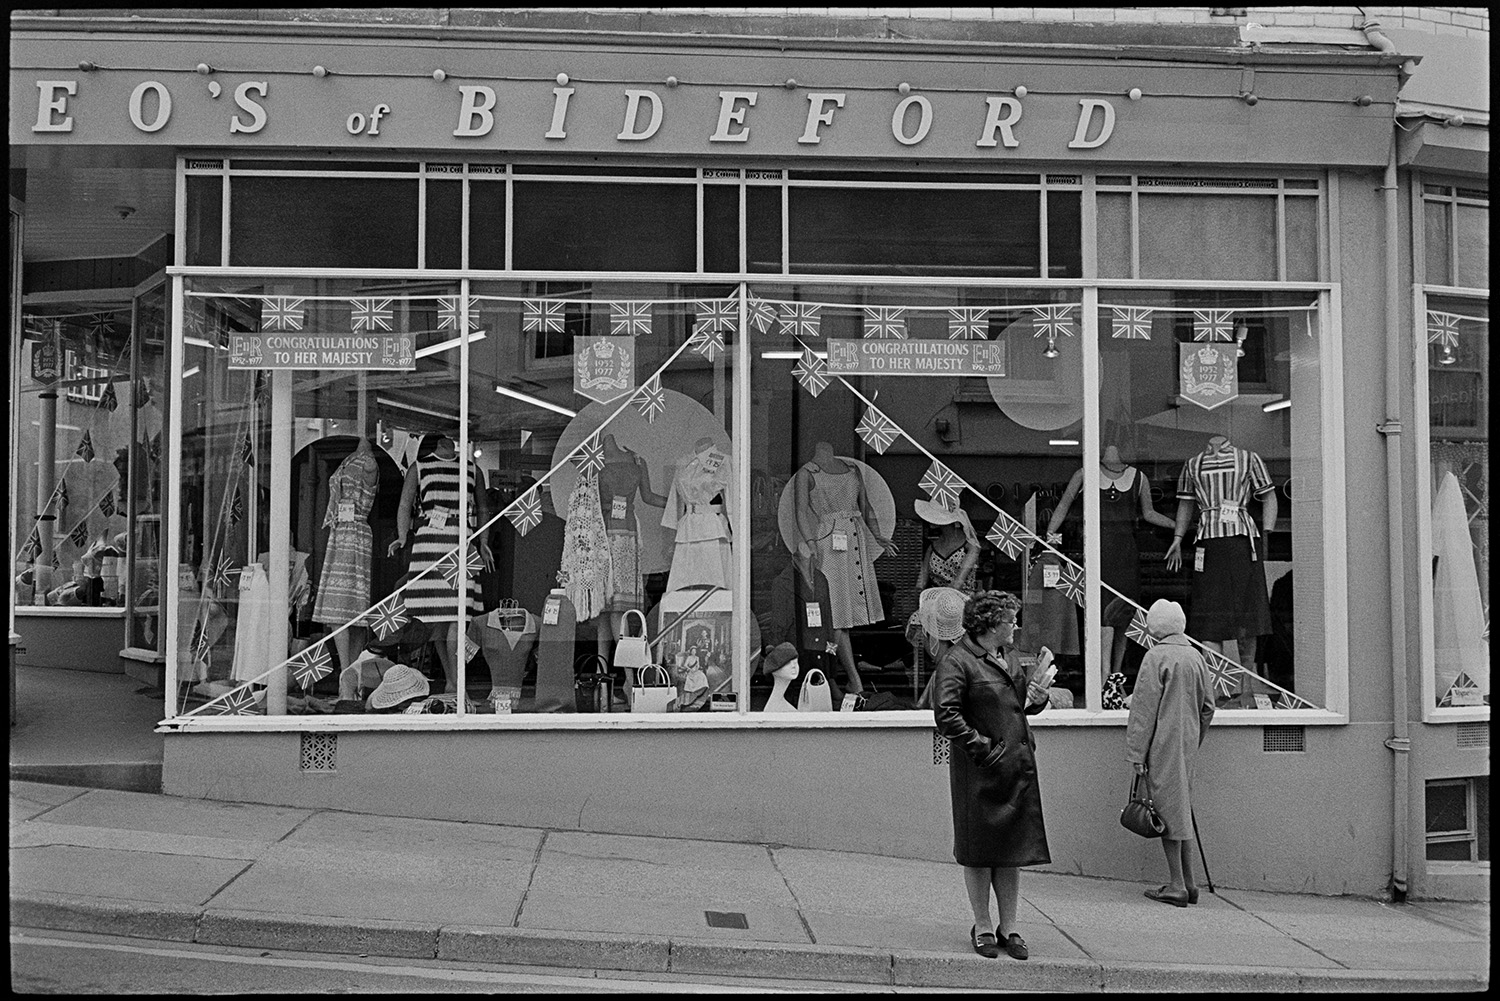 Clothes shop windows decorated for Jubilee. 
[The shop front window of Leo's of Bideford clothes shop decorated with Union Jack flags for Queen Elizabeth II Silver Jubilee. A woman I looking in the shop window while another is waiting to cross the road.]